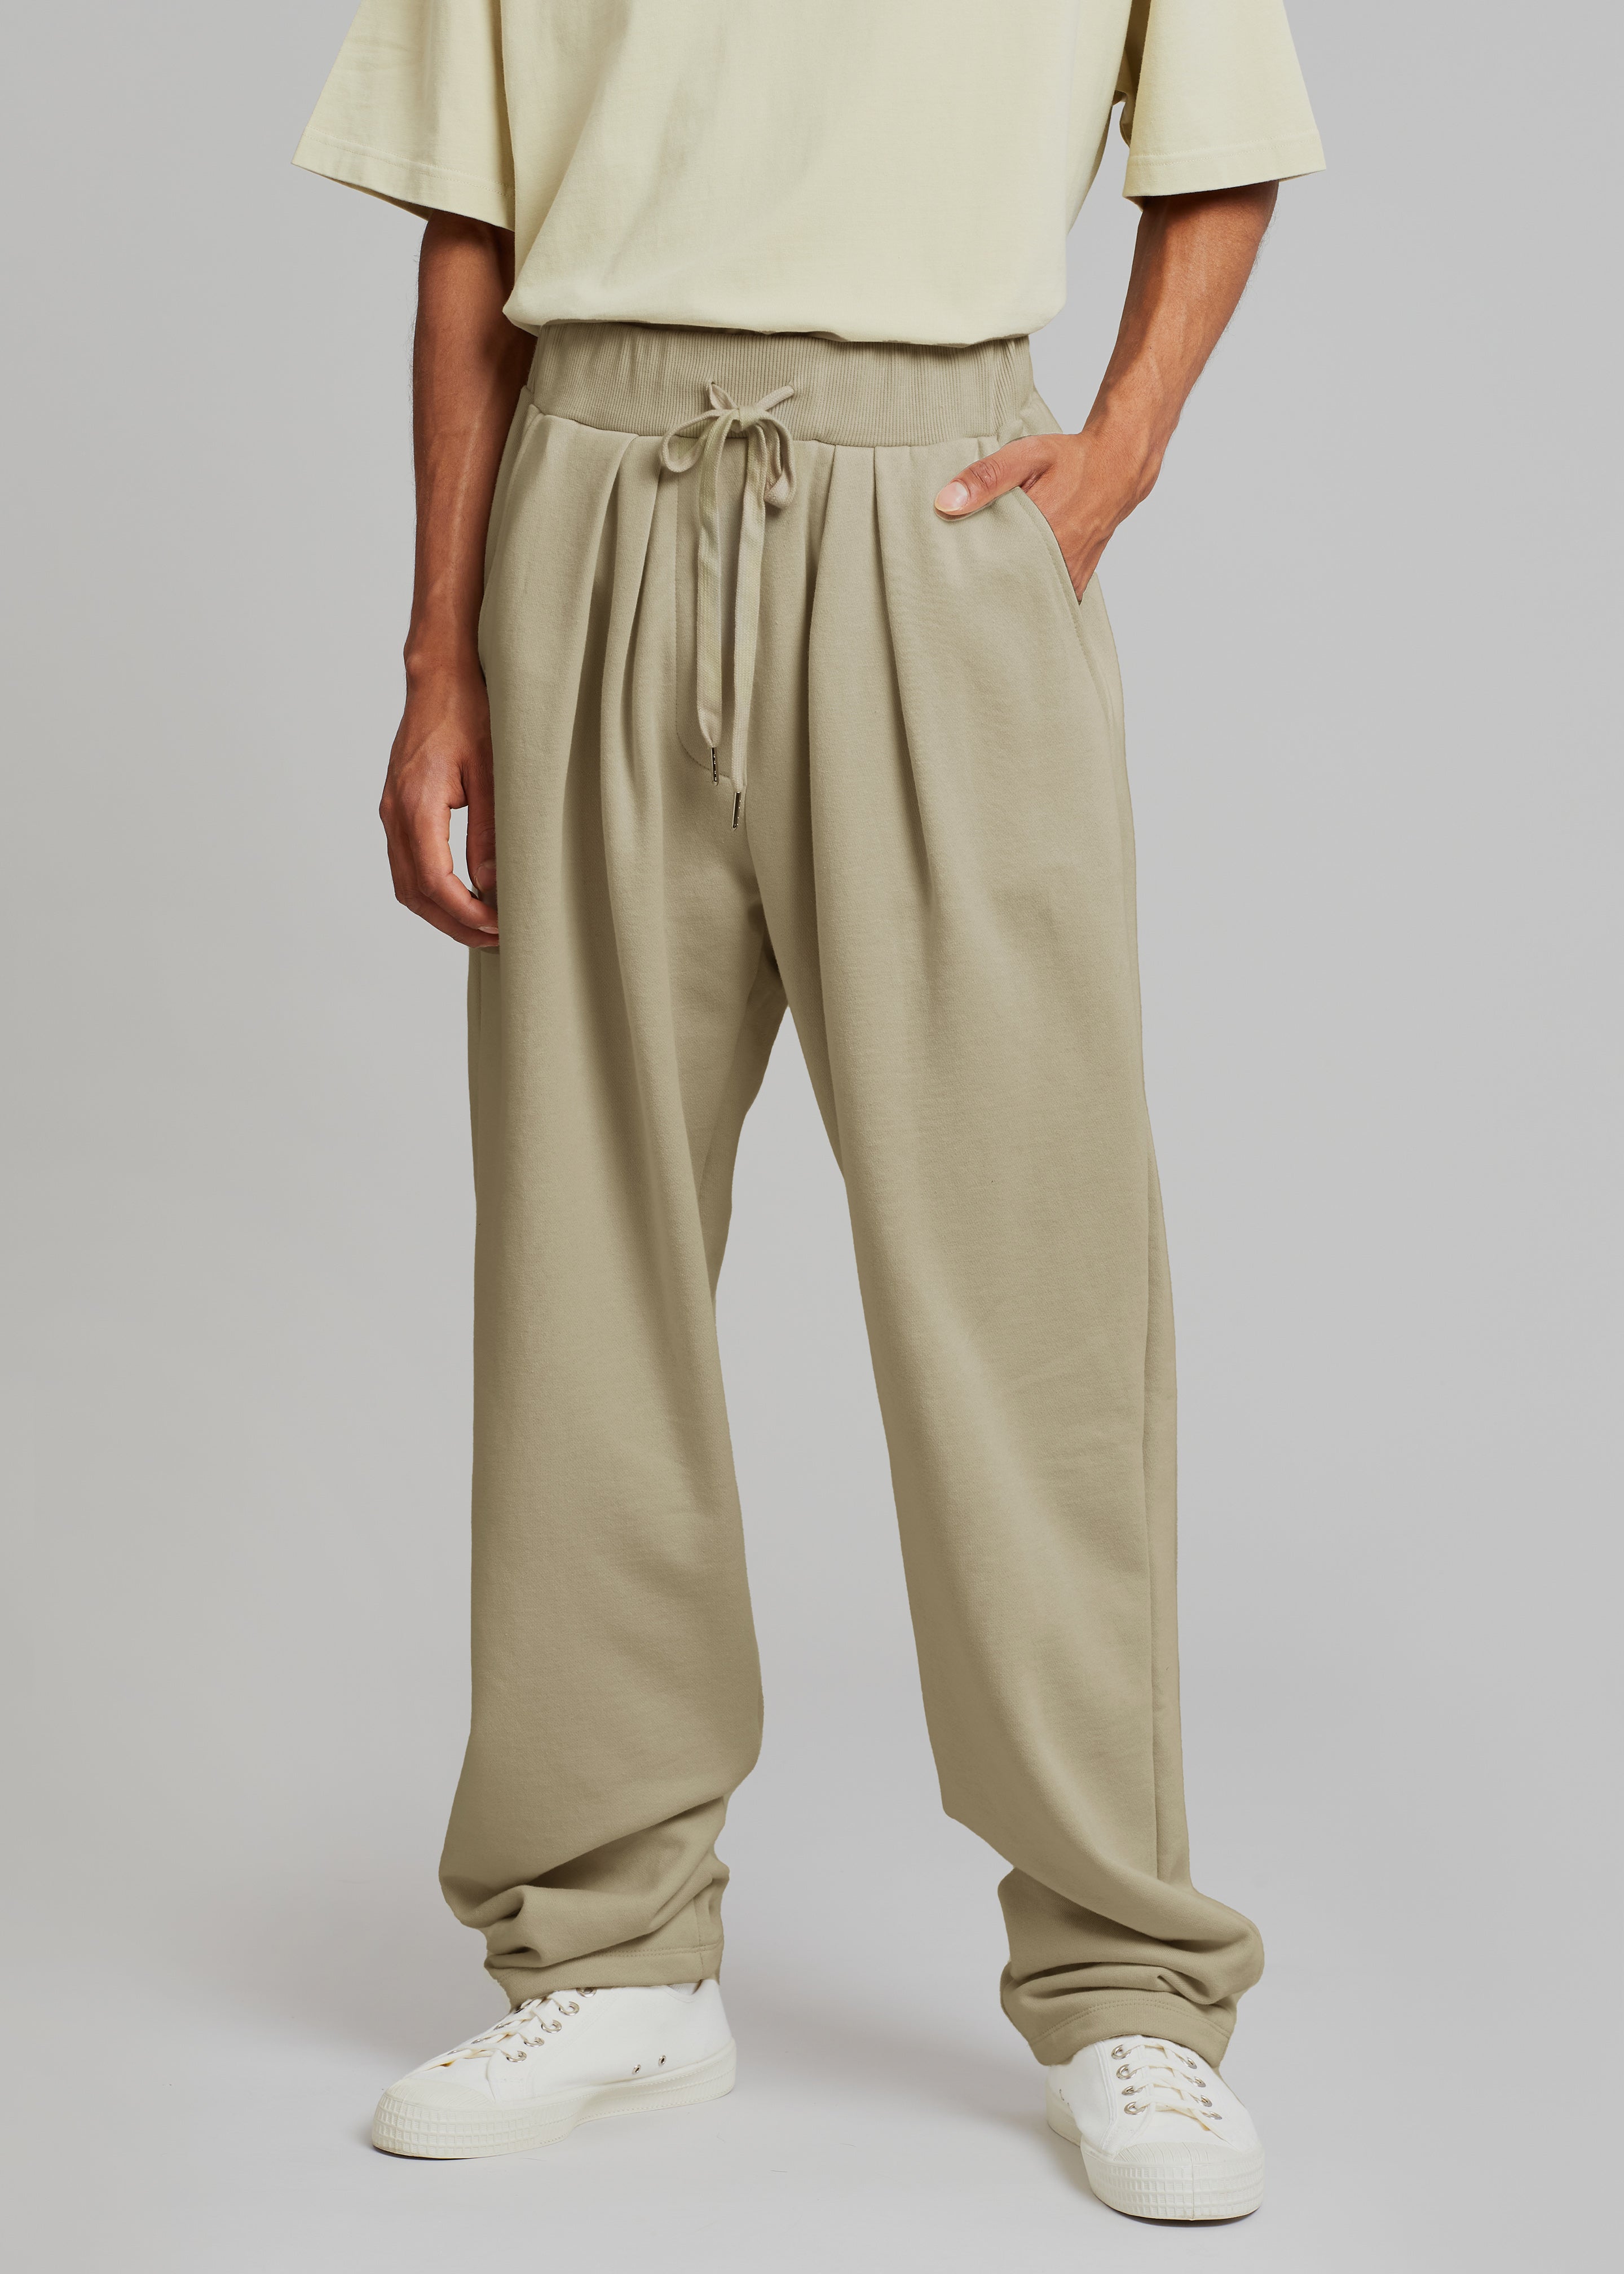 Alec Pleated Jogger Pants - Olive - 3